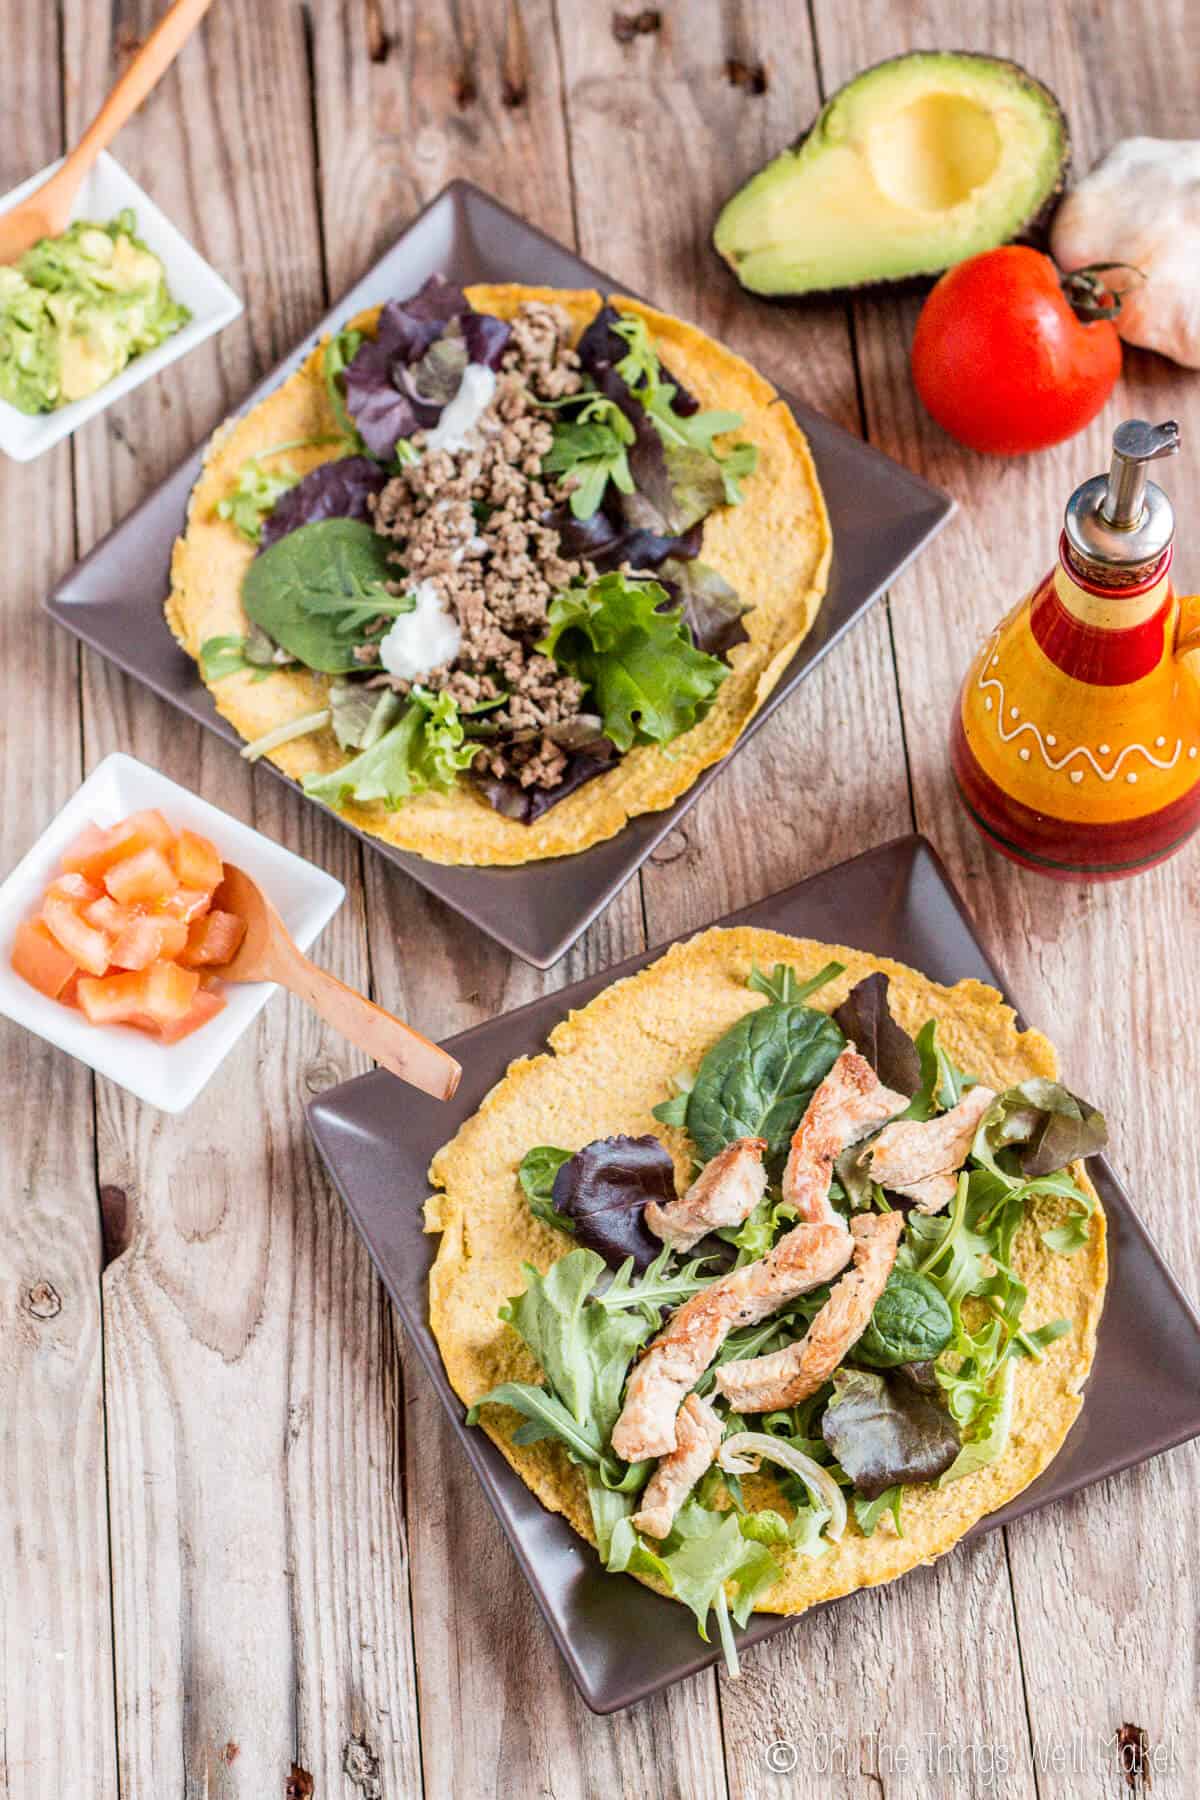 These quick, pliable, low carb, paleo tortillas are my go to recipe now whenever we cook Mexican foods or I want to make myself a sandwich or lettuce wrap.